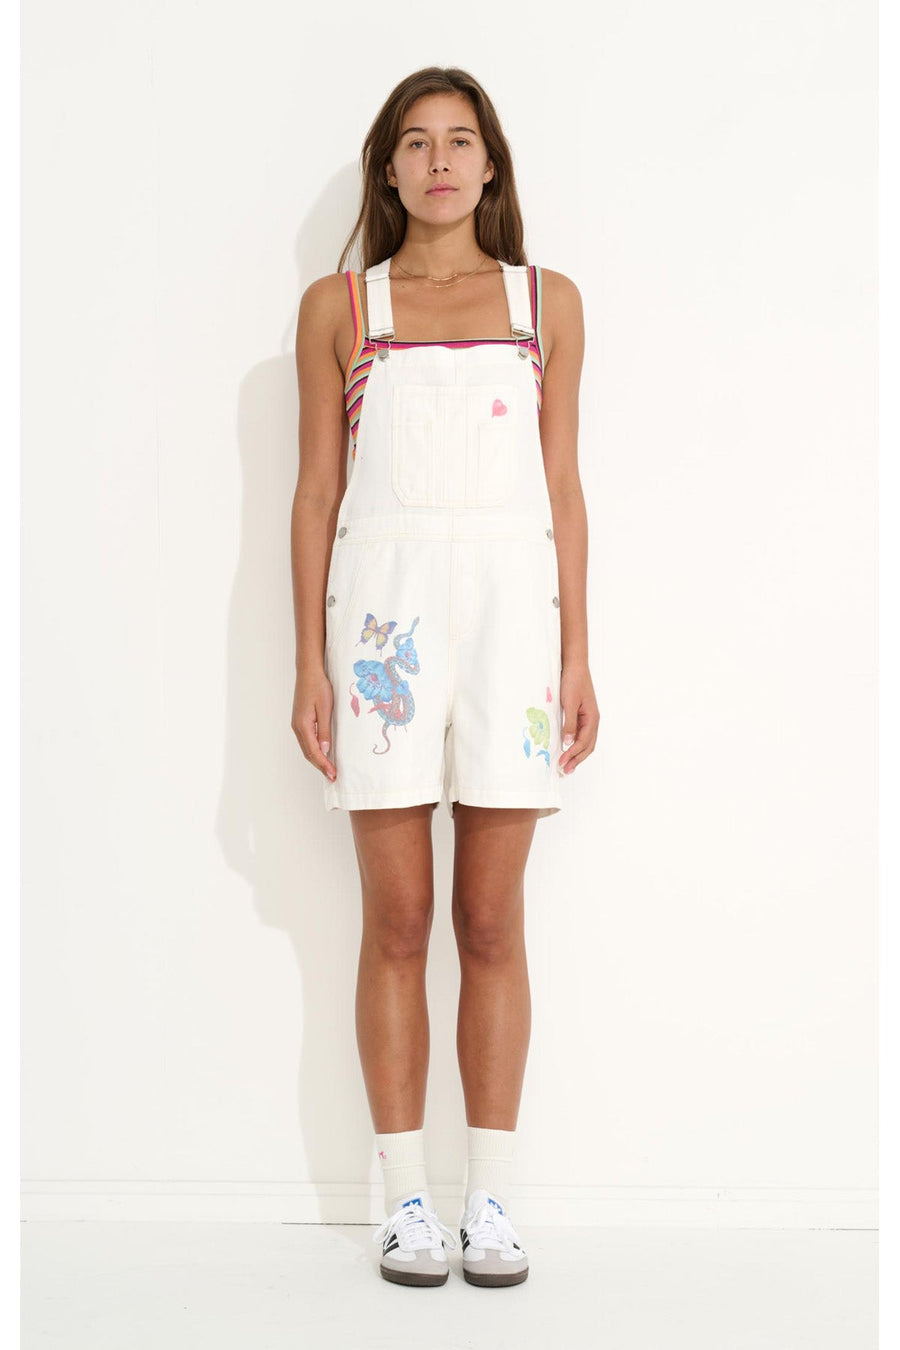 MISFIT HEAVENLY PEOPLE SHORT OVERALL - WHITE NATURE - WILDROSE